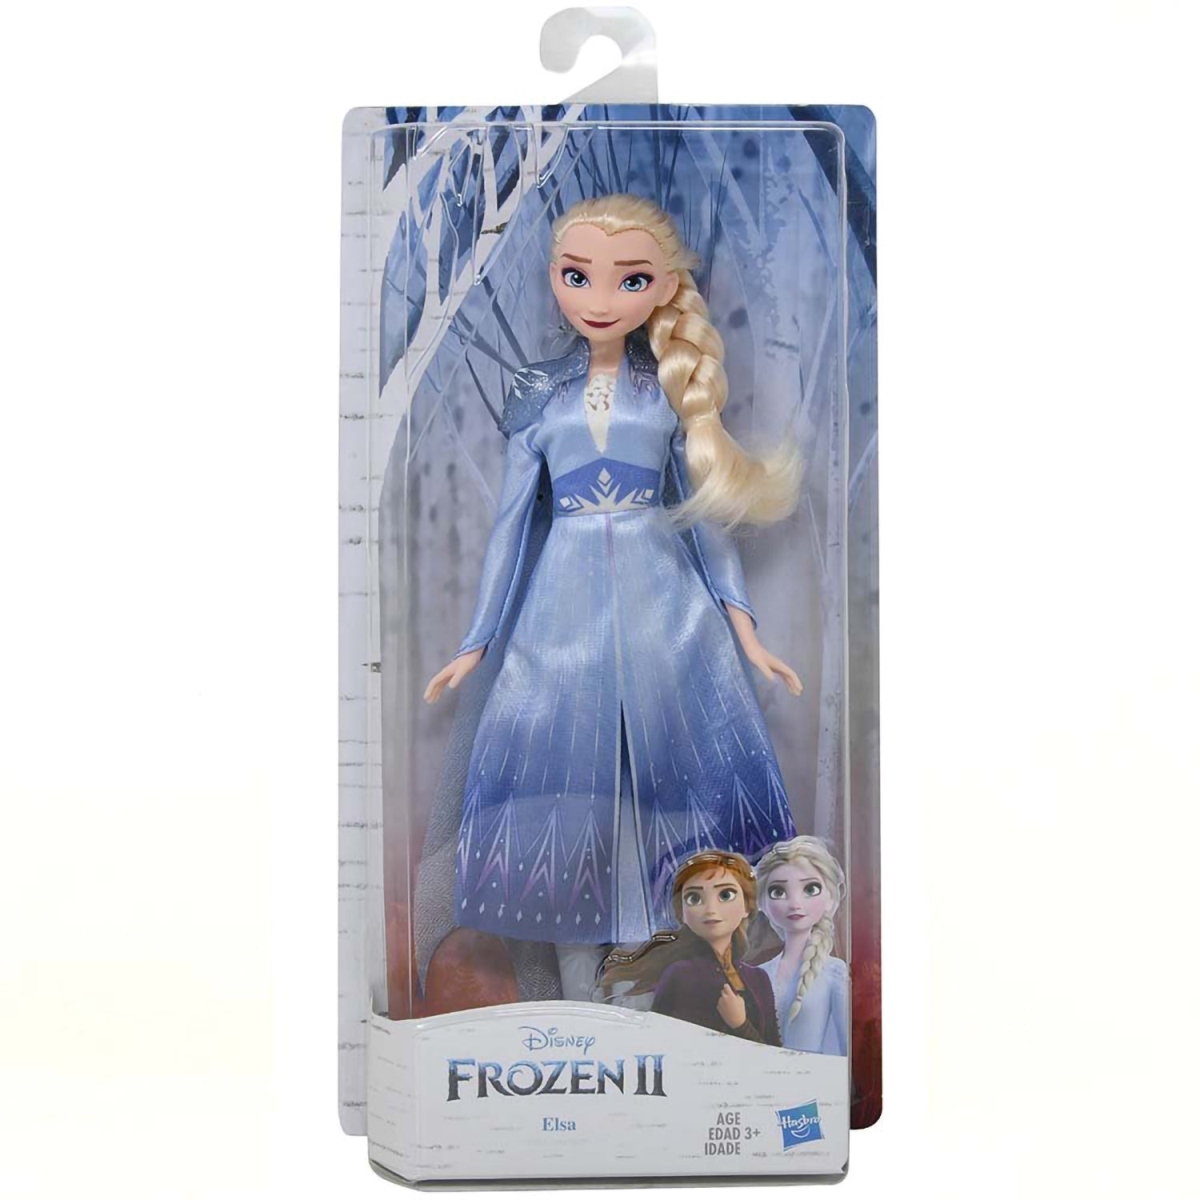 Disney Frozen Elsa Fashion Doll with Long Blonde Hair & Blue Outfit